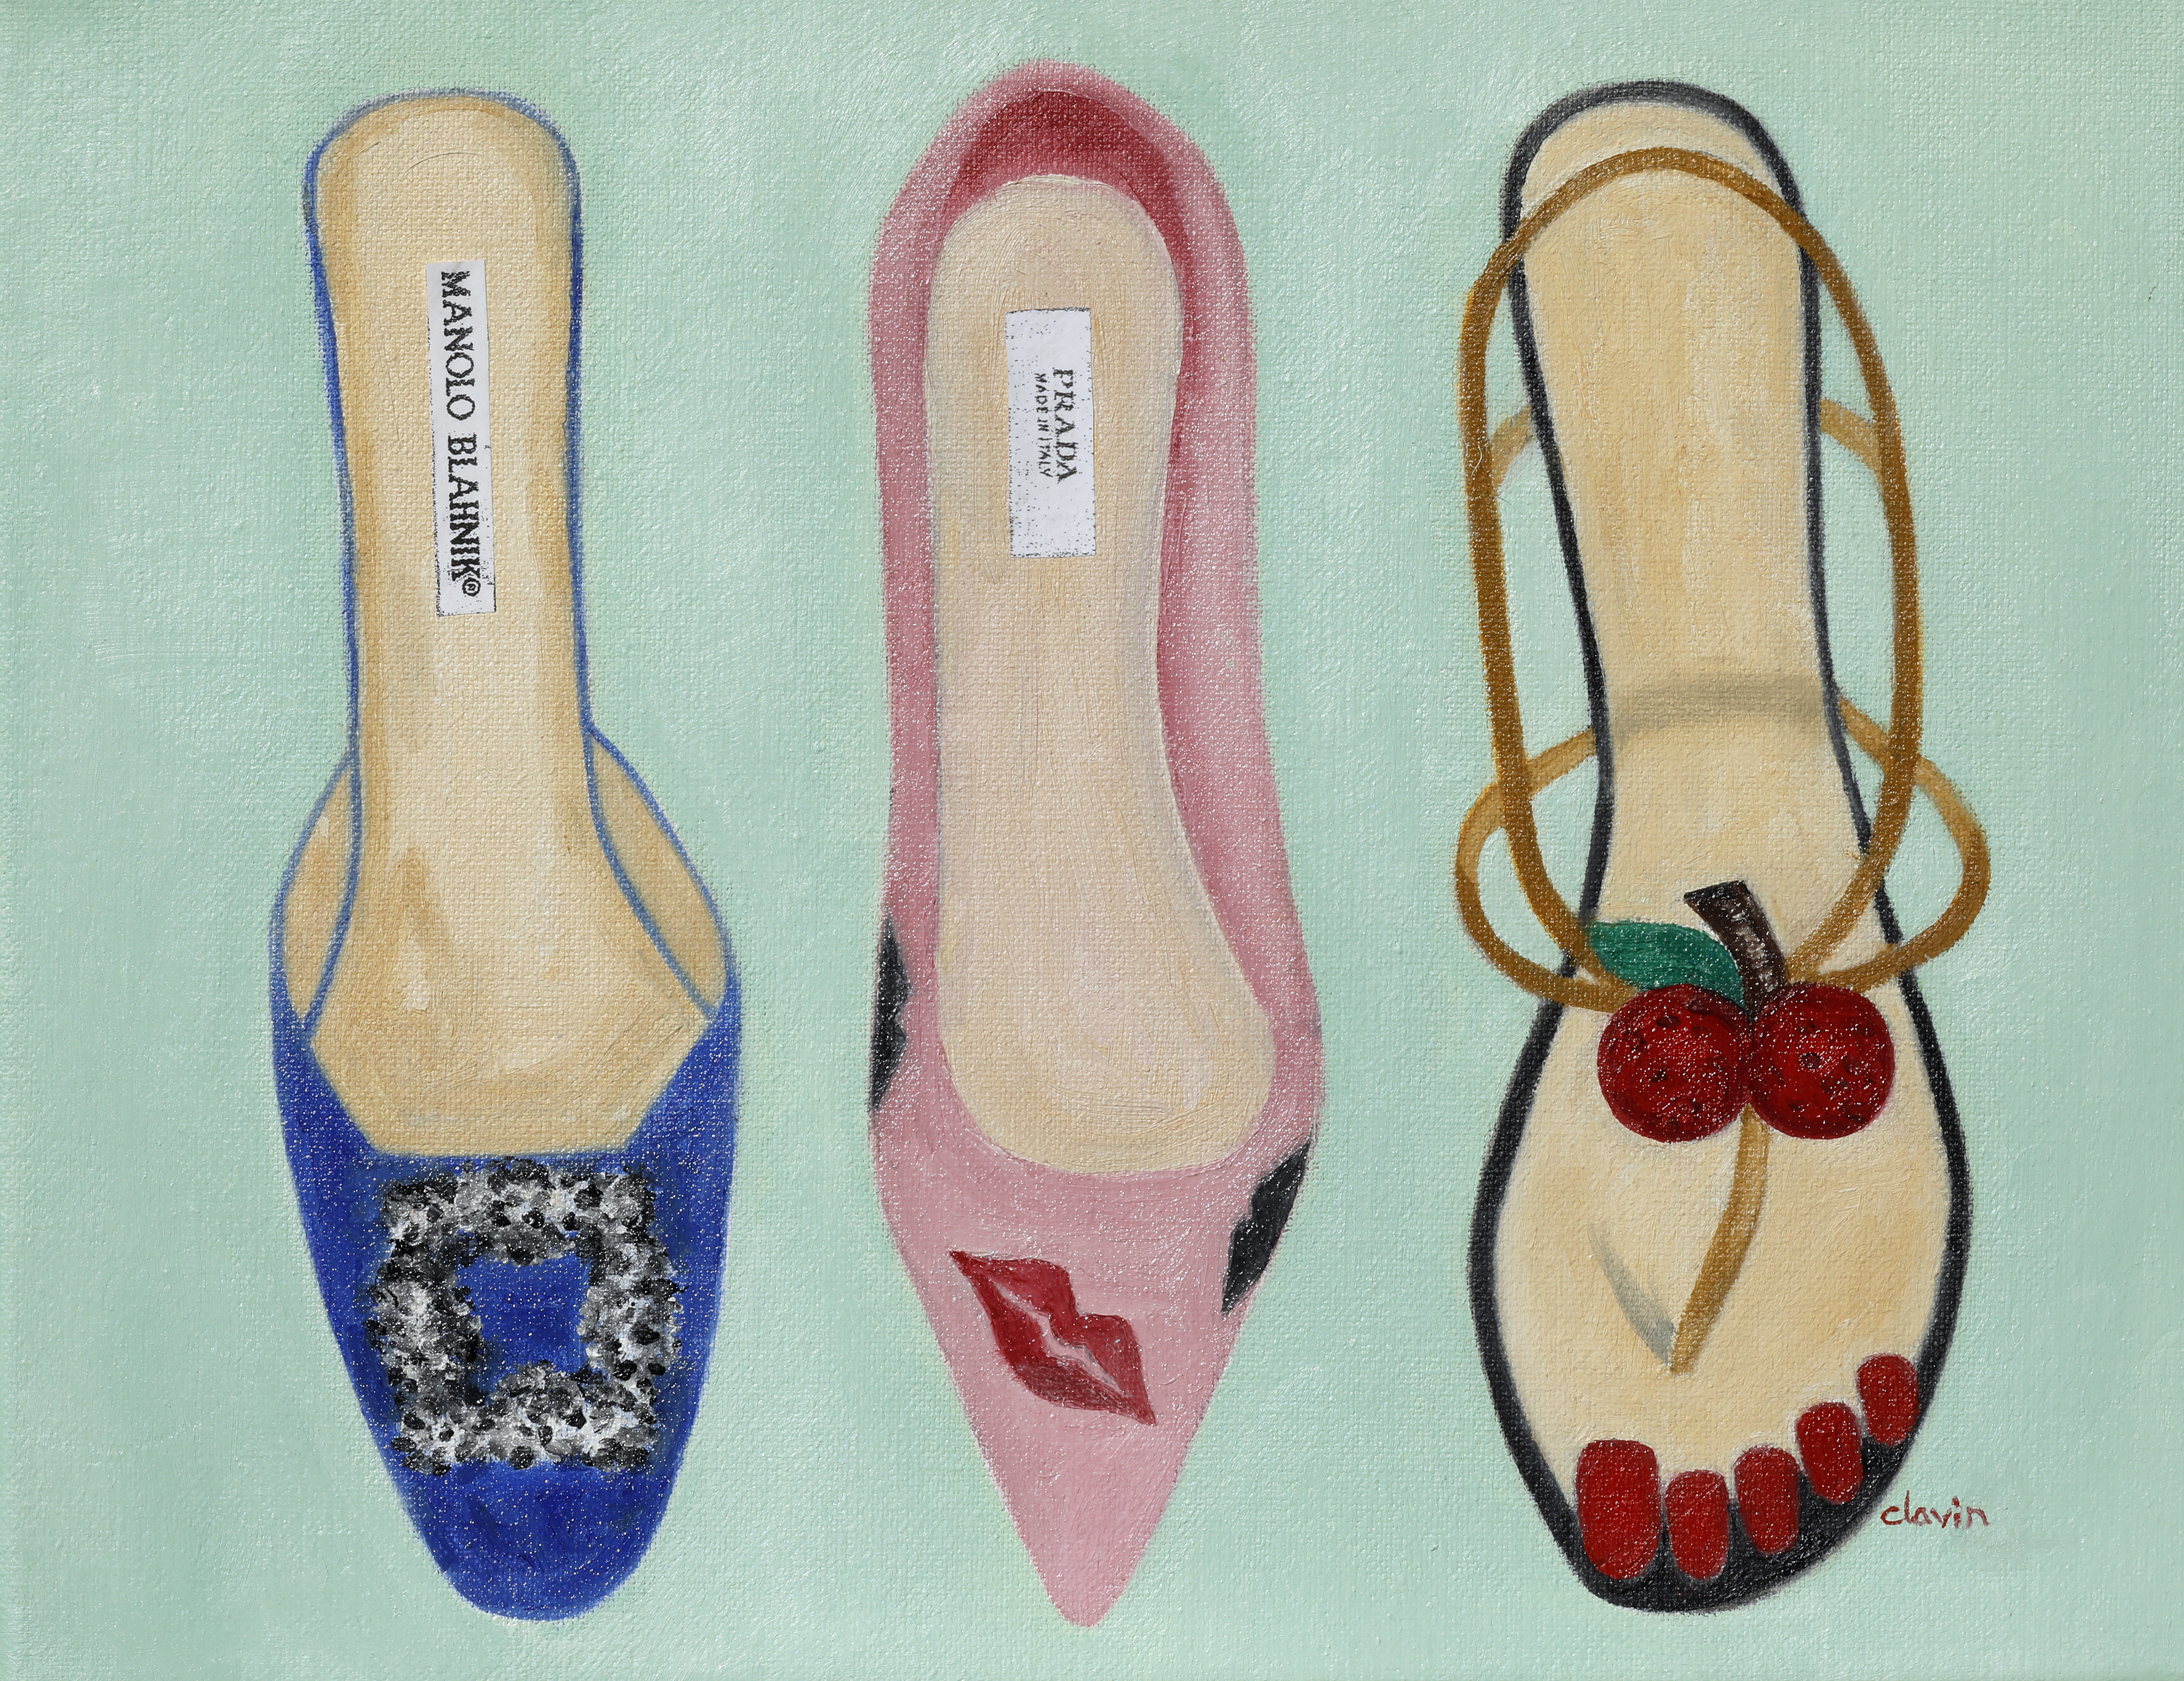 3 shoes, green background   11x14  $300.00